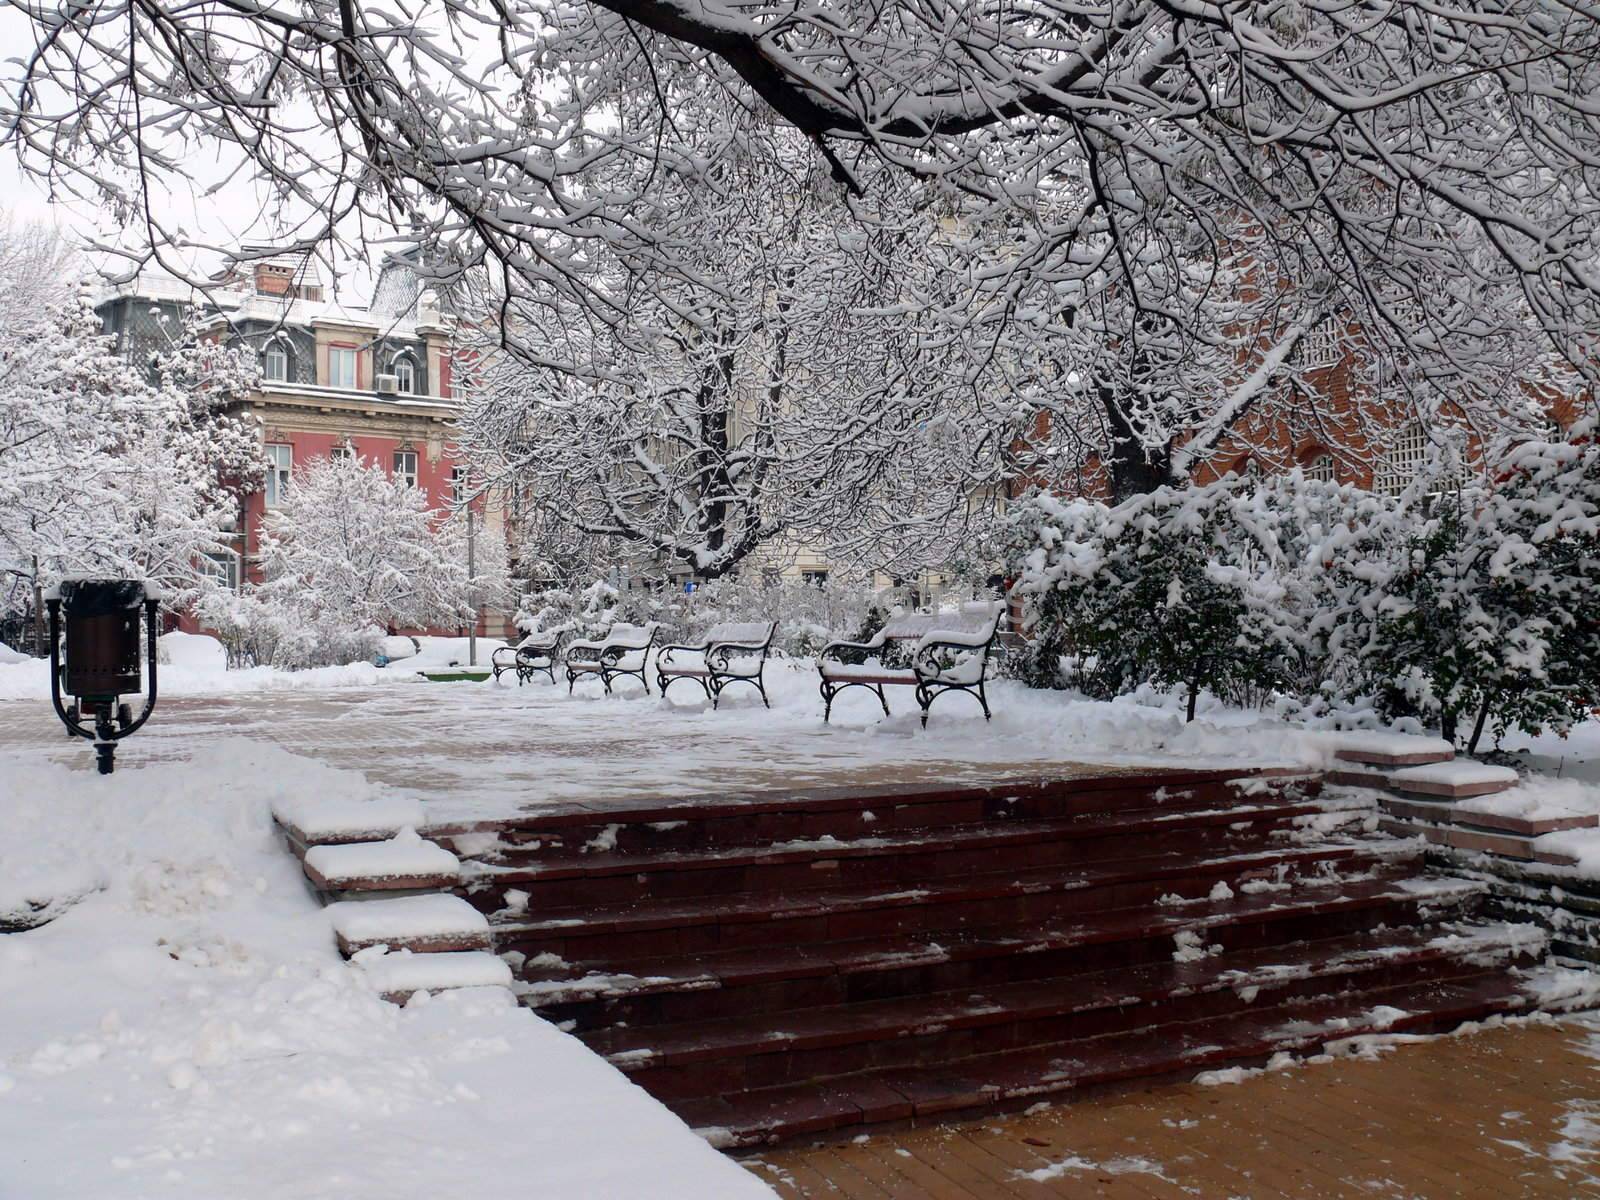 Benches with snow in Sofia, Bulgaria